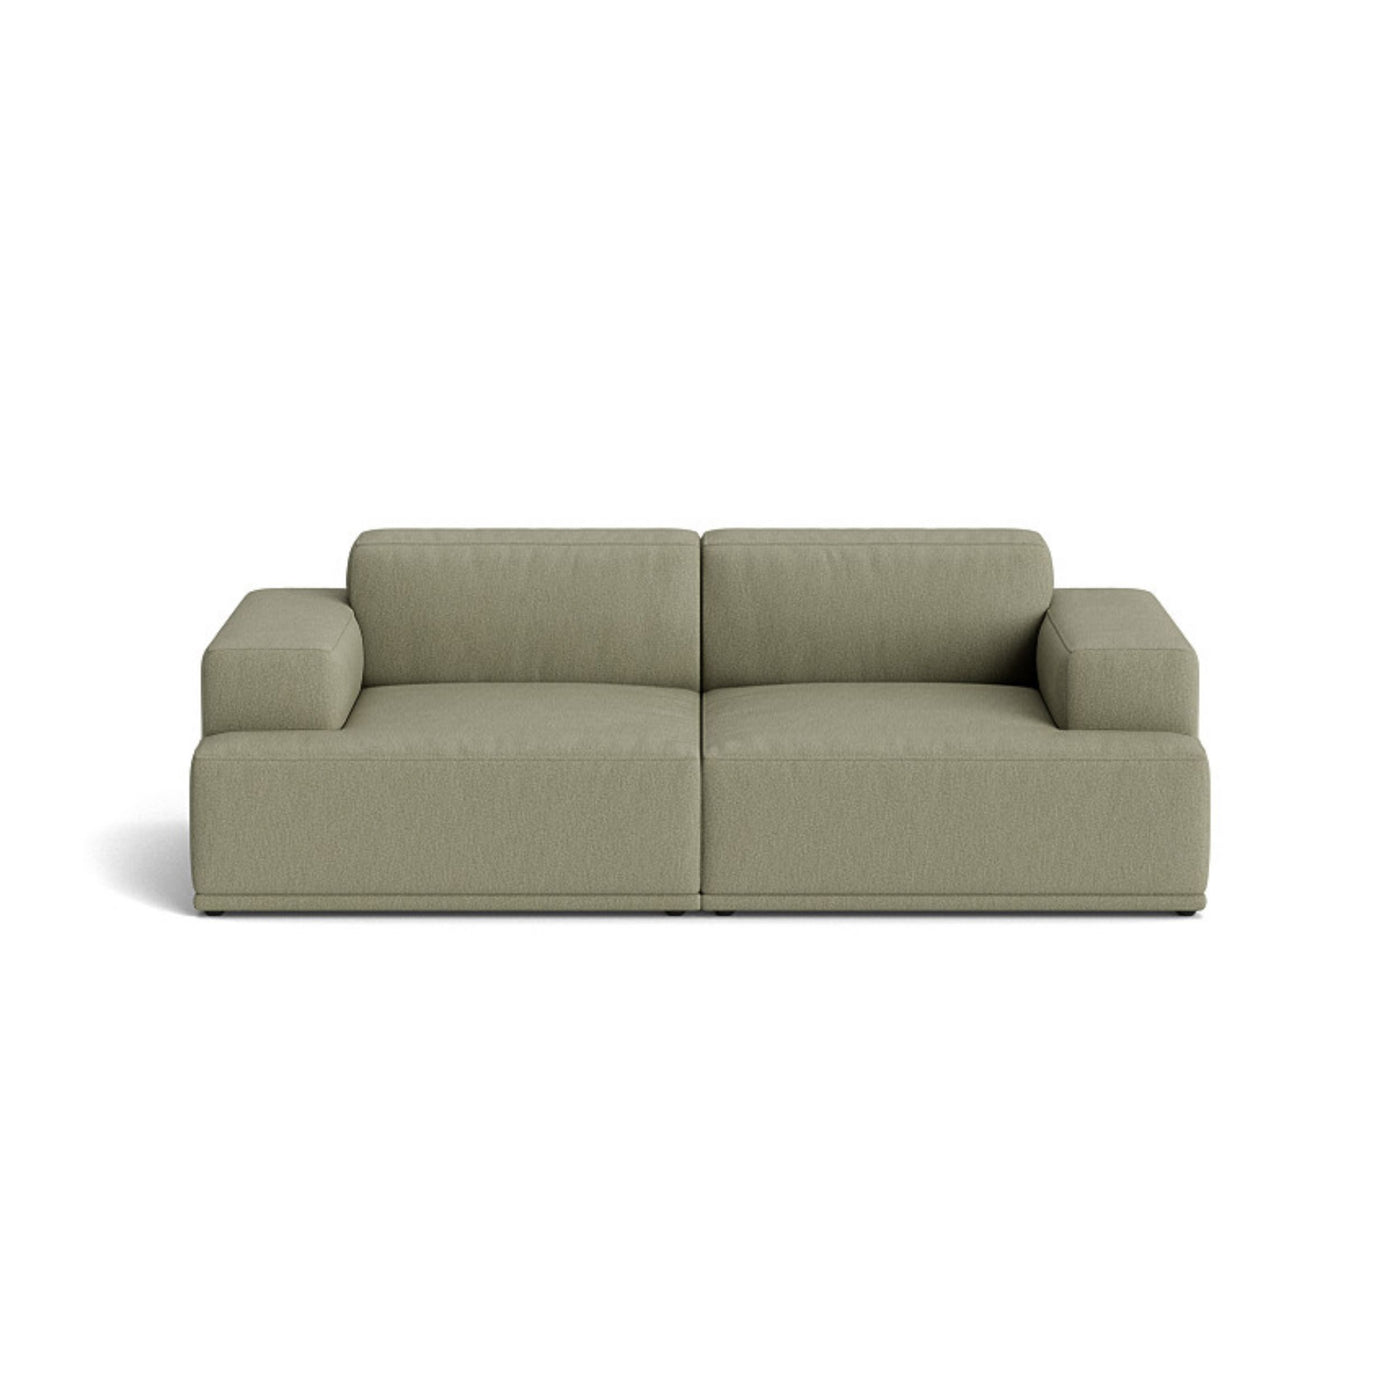 Muuto Connect Soft Modular 2 Seater Sofa, configuration 1. made-to-order from someday designs. #colour_clay-15